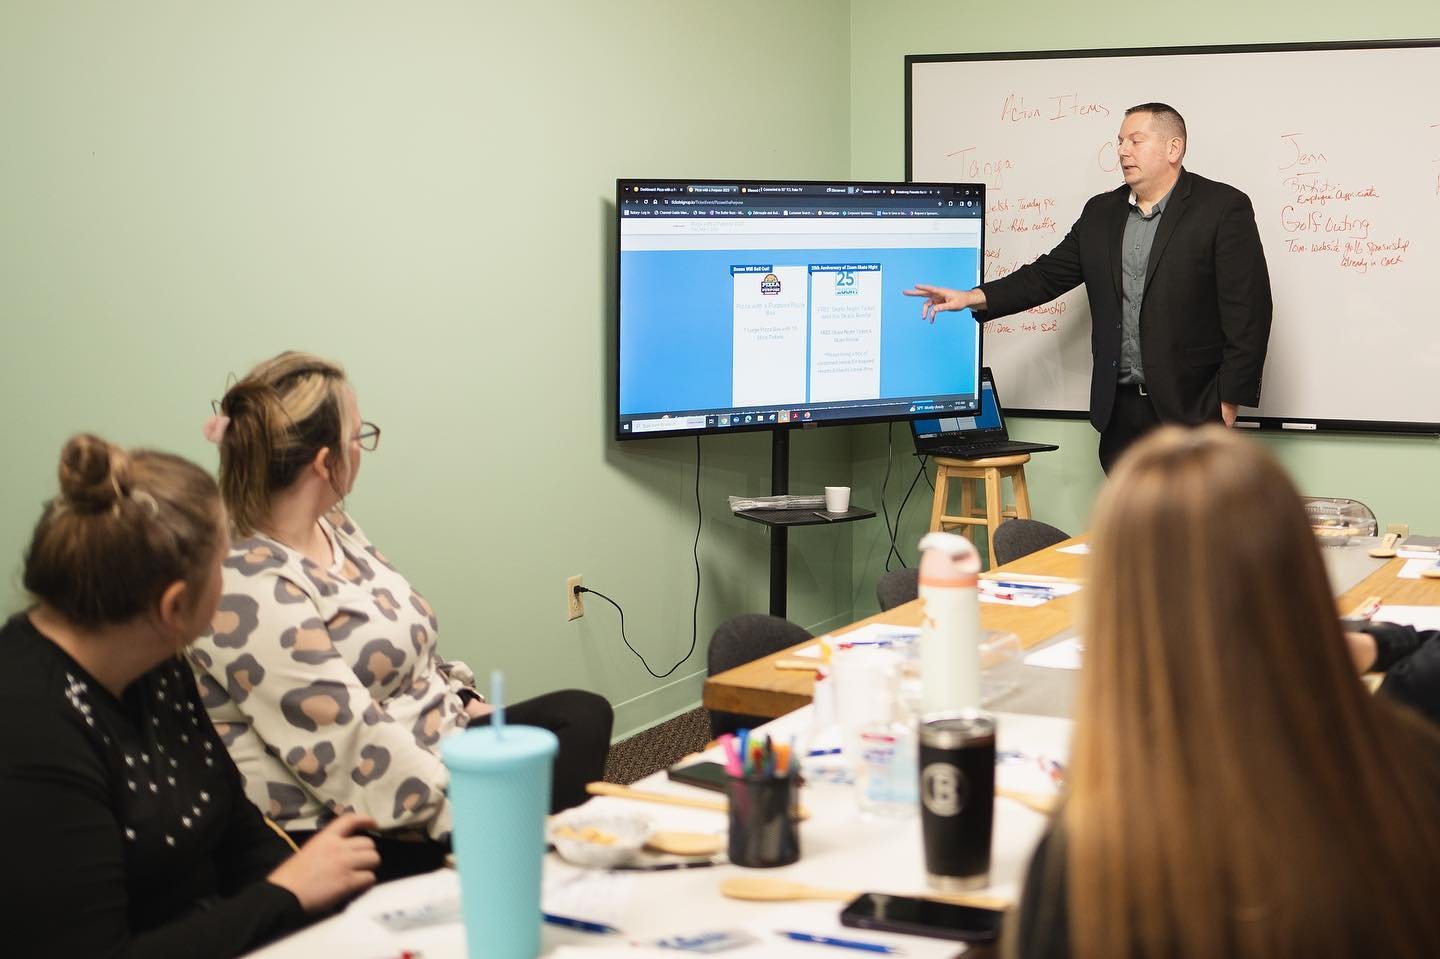 A big thank you to Seth Prentice from @followarmstrong and Amanda Fleming from @thebrandingagency_proforma for leading our latest Chamber training! They shared invaluable tips on setting up as a vendor, drawing attraction to your table, and selecting